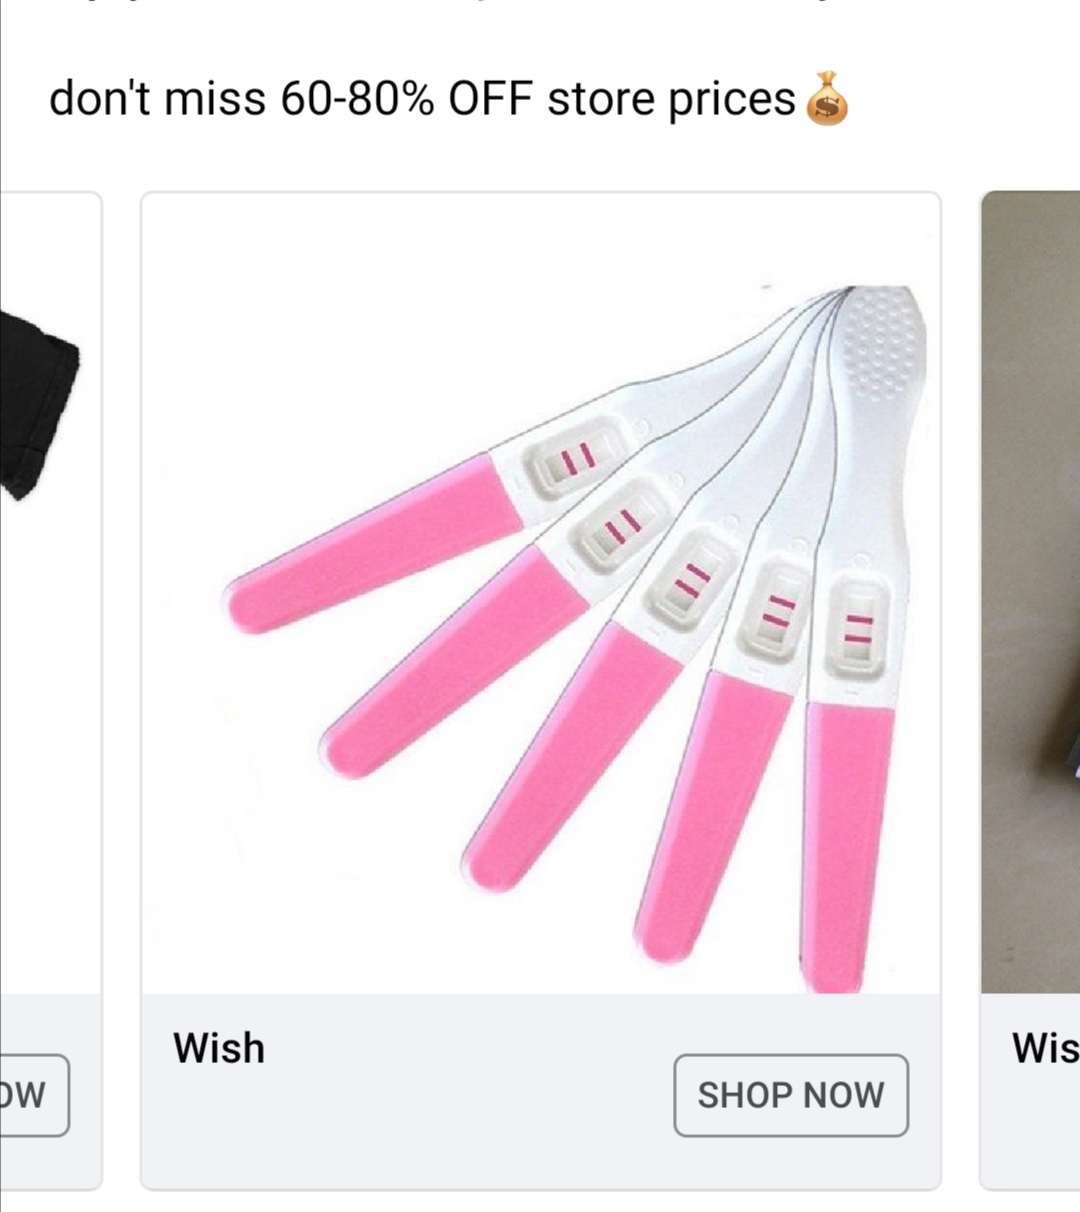 predictor early - don't miss 6080% Off store prices $ Wish Wis Dw Shop Now